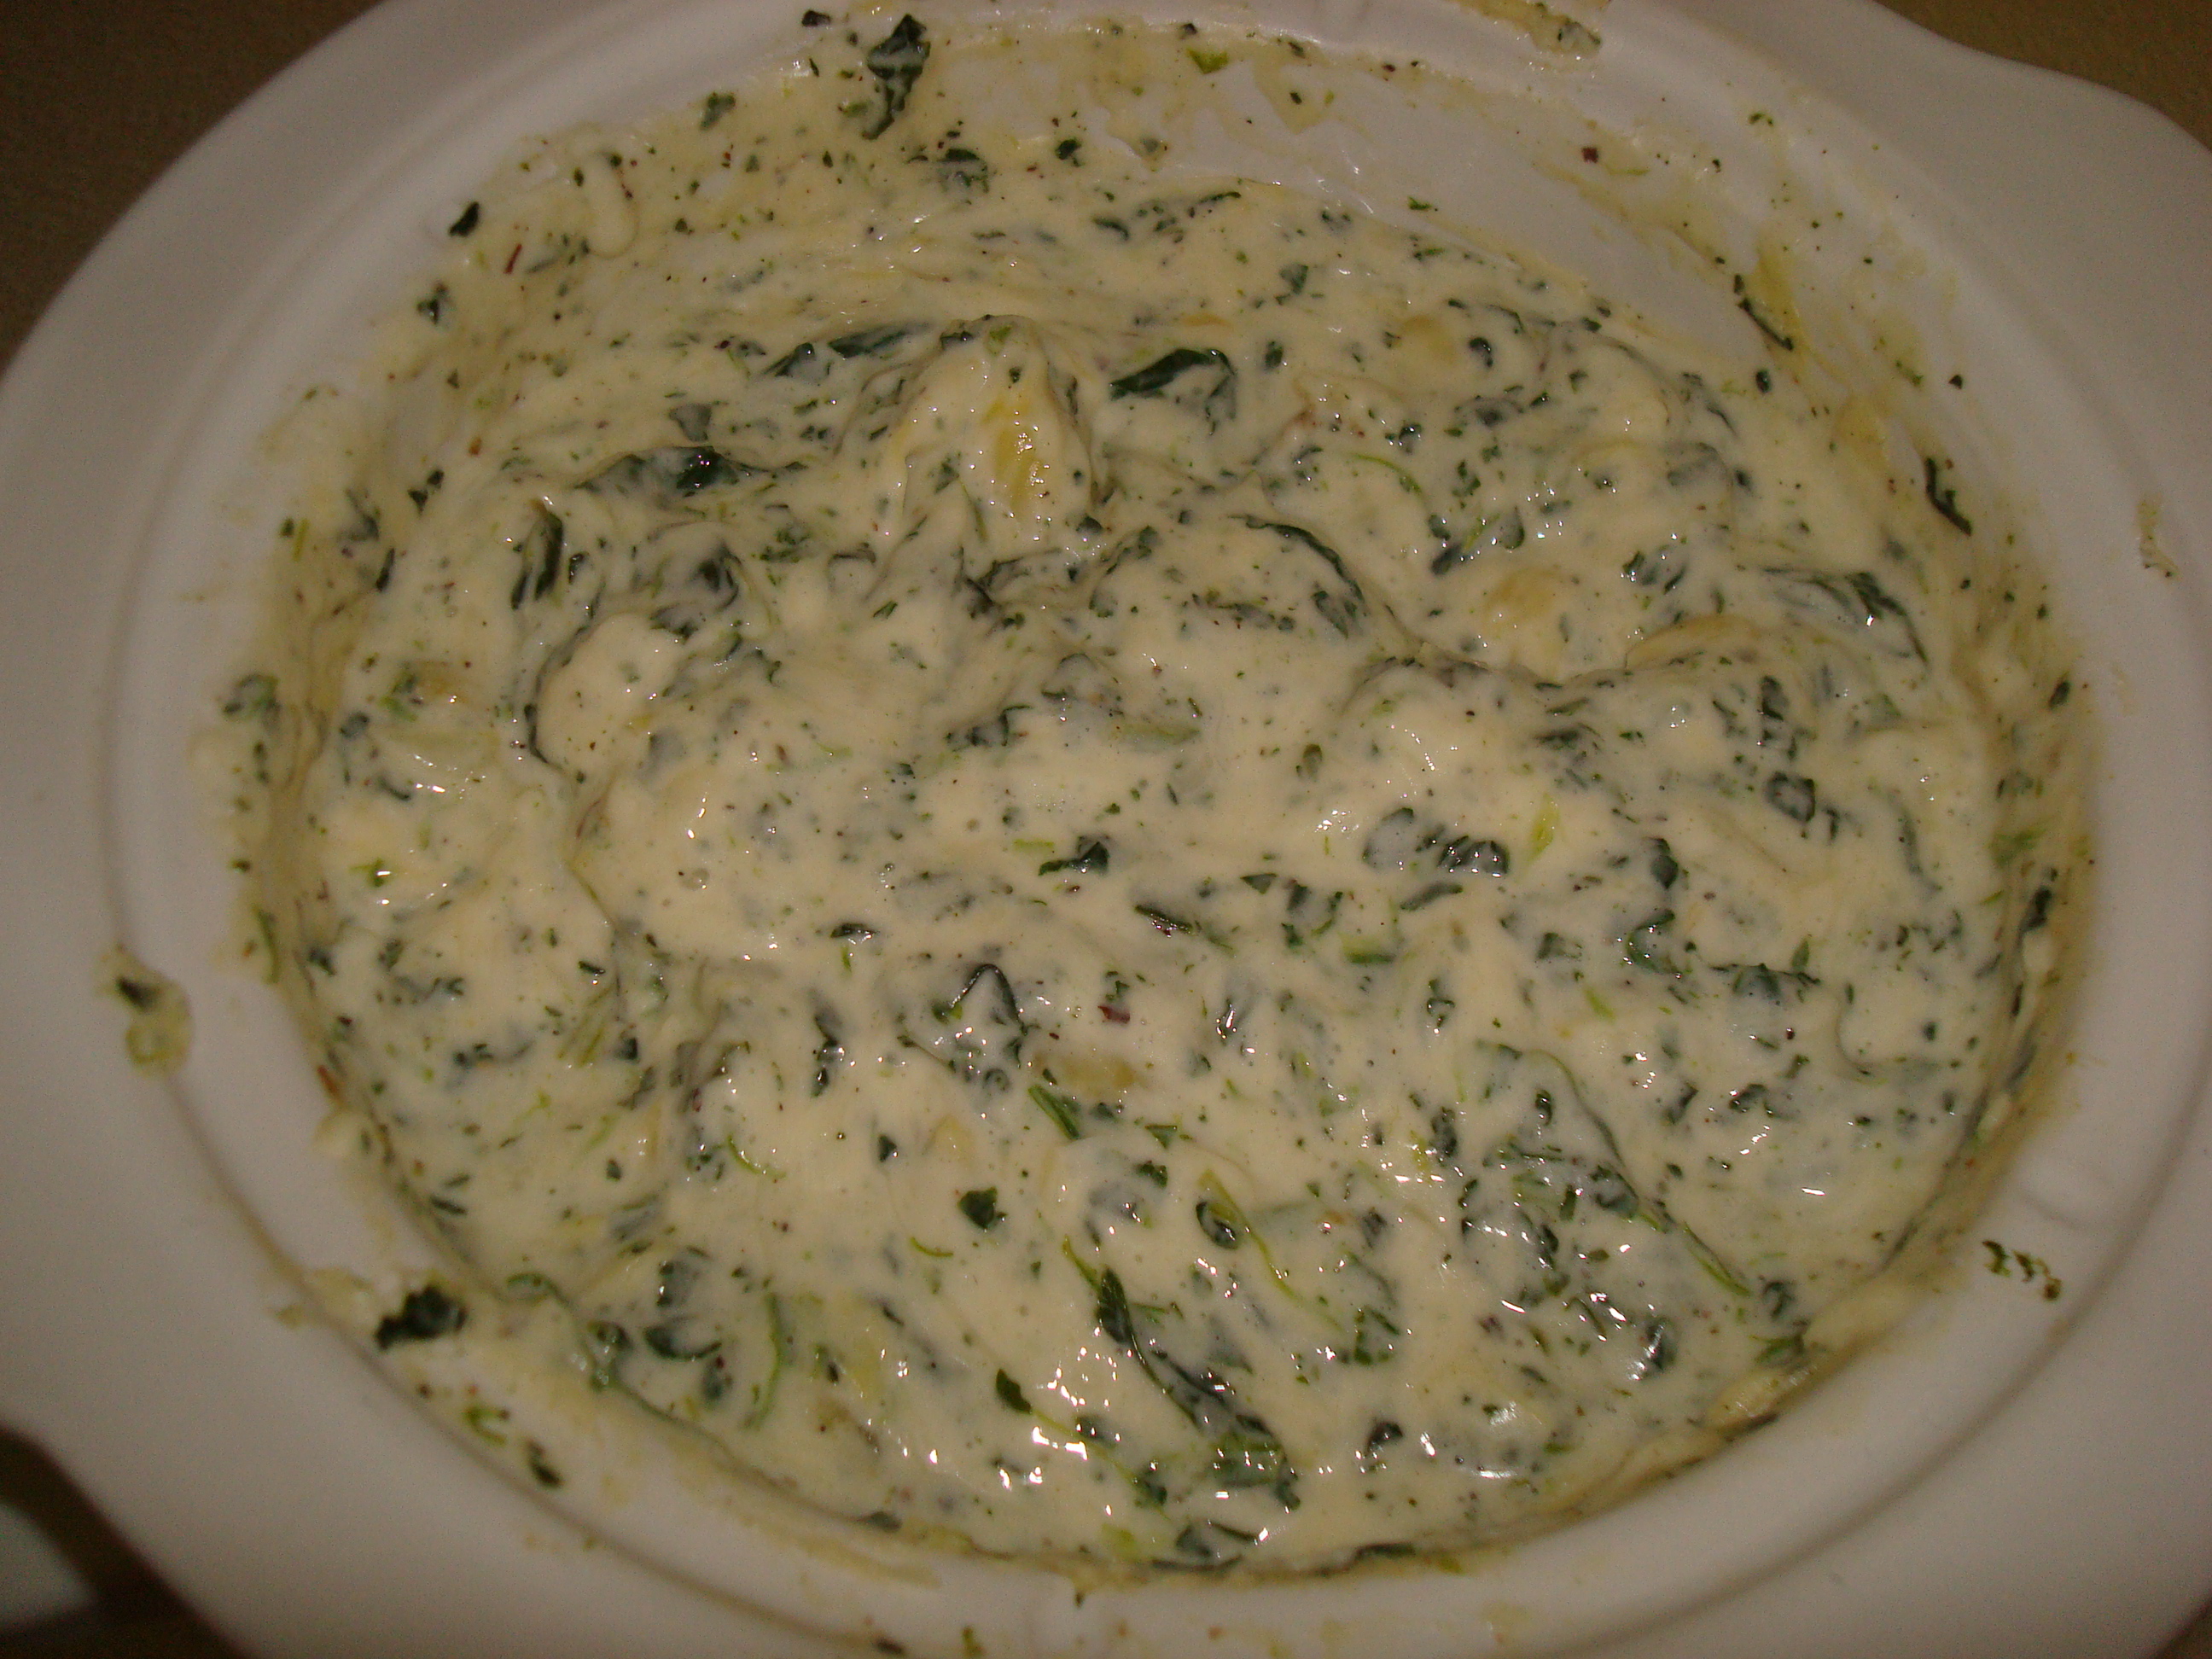 Hot Spinach and Artichoke Dip | Tasty Kitchen: A Happy Recipe Community!